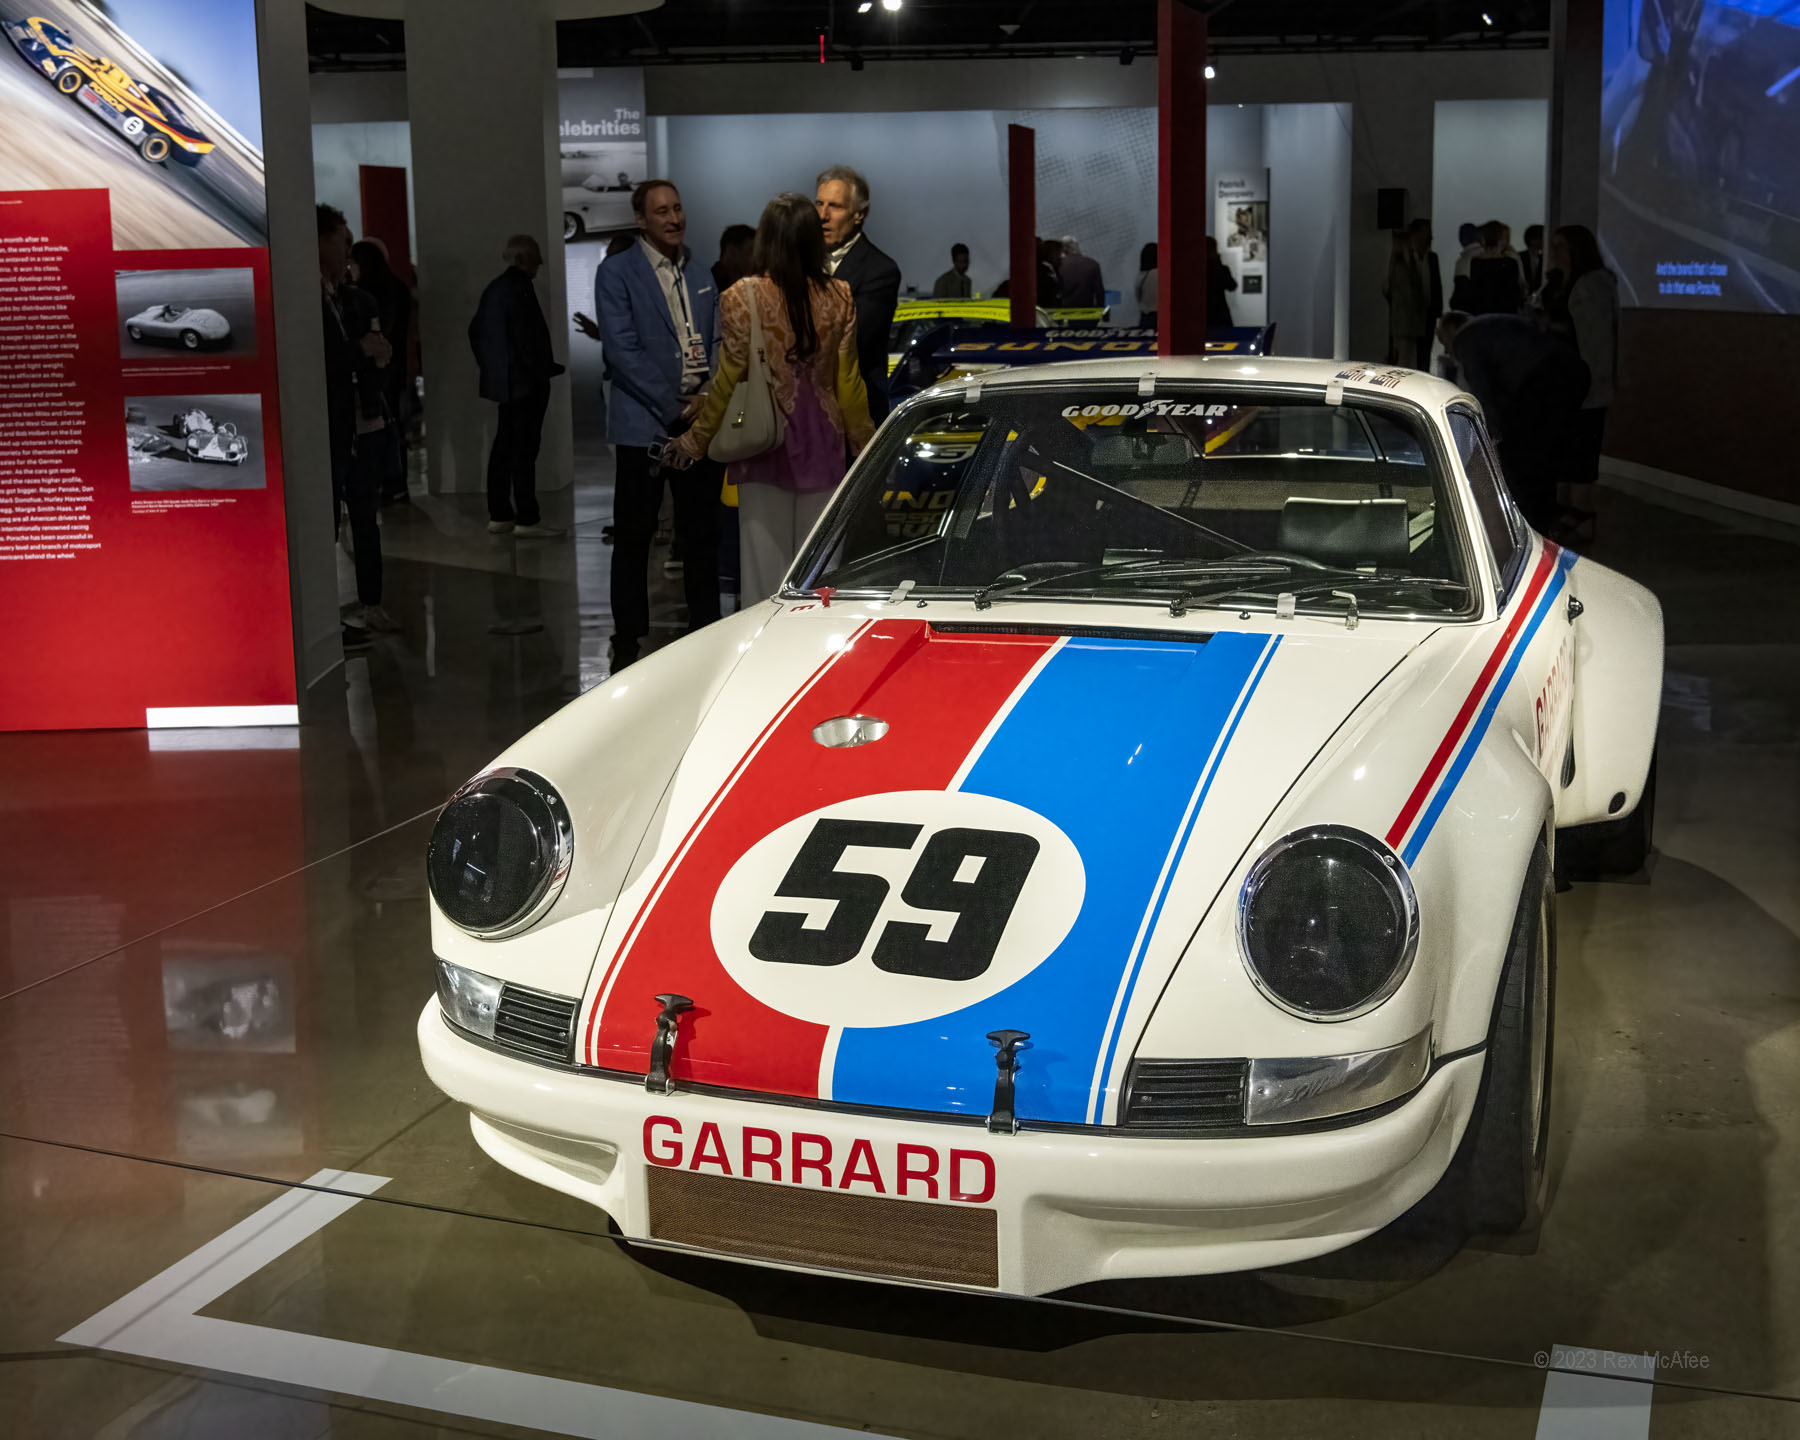 This 1973 Porsche 911 Carrera 2.8 RSR with drivers Peter Gregg and Hurley Haywood, won both the IMSA and Trans-Am championships in 1973, including victories at the IMSA 3 Hours at Daytona and Camel GT 250 at Daytona. PHoto © 2023 Rex McAfee RexMcAfee@gmail.com